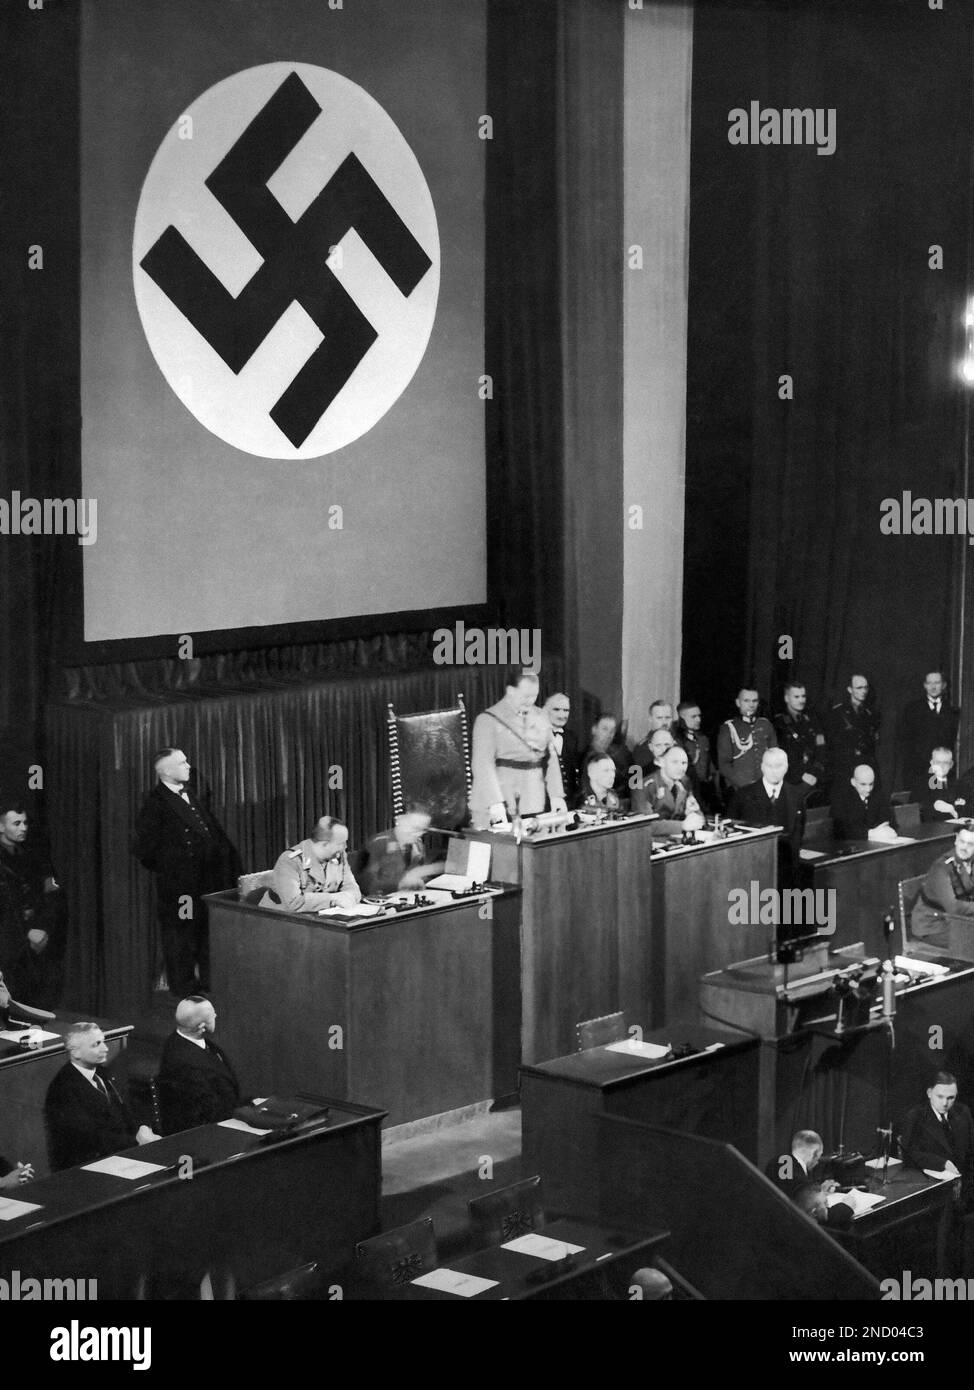 President Goering has opened the new Reichstag session in the Kroll Opera Building in Berlin, Dec. 12, 1933. The whole new Reichstag consists of National Socialist Colligates only. A view of the session during the speech of President R. Goering. (AP Photo) Stock Photo